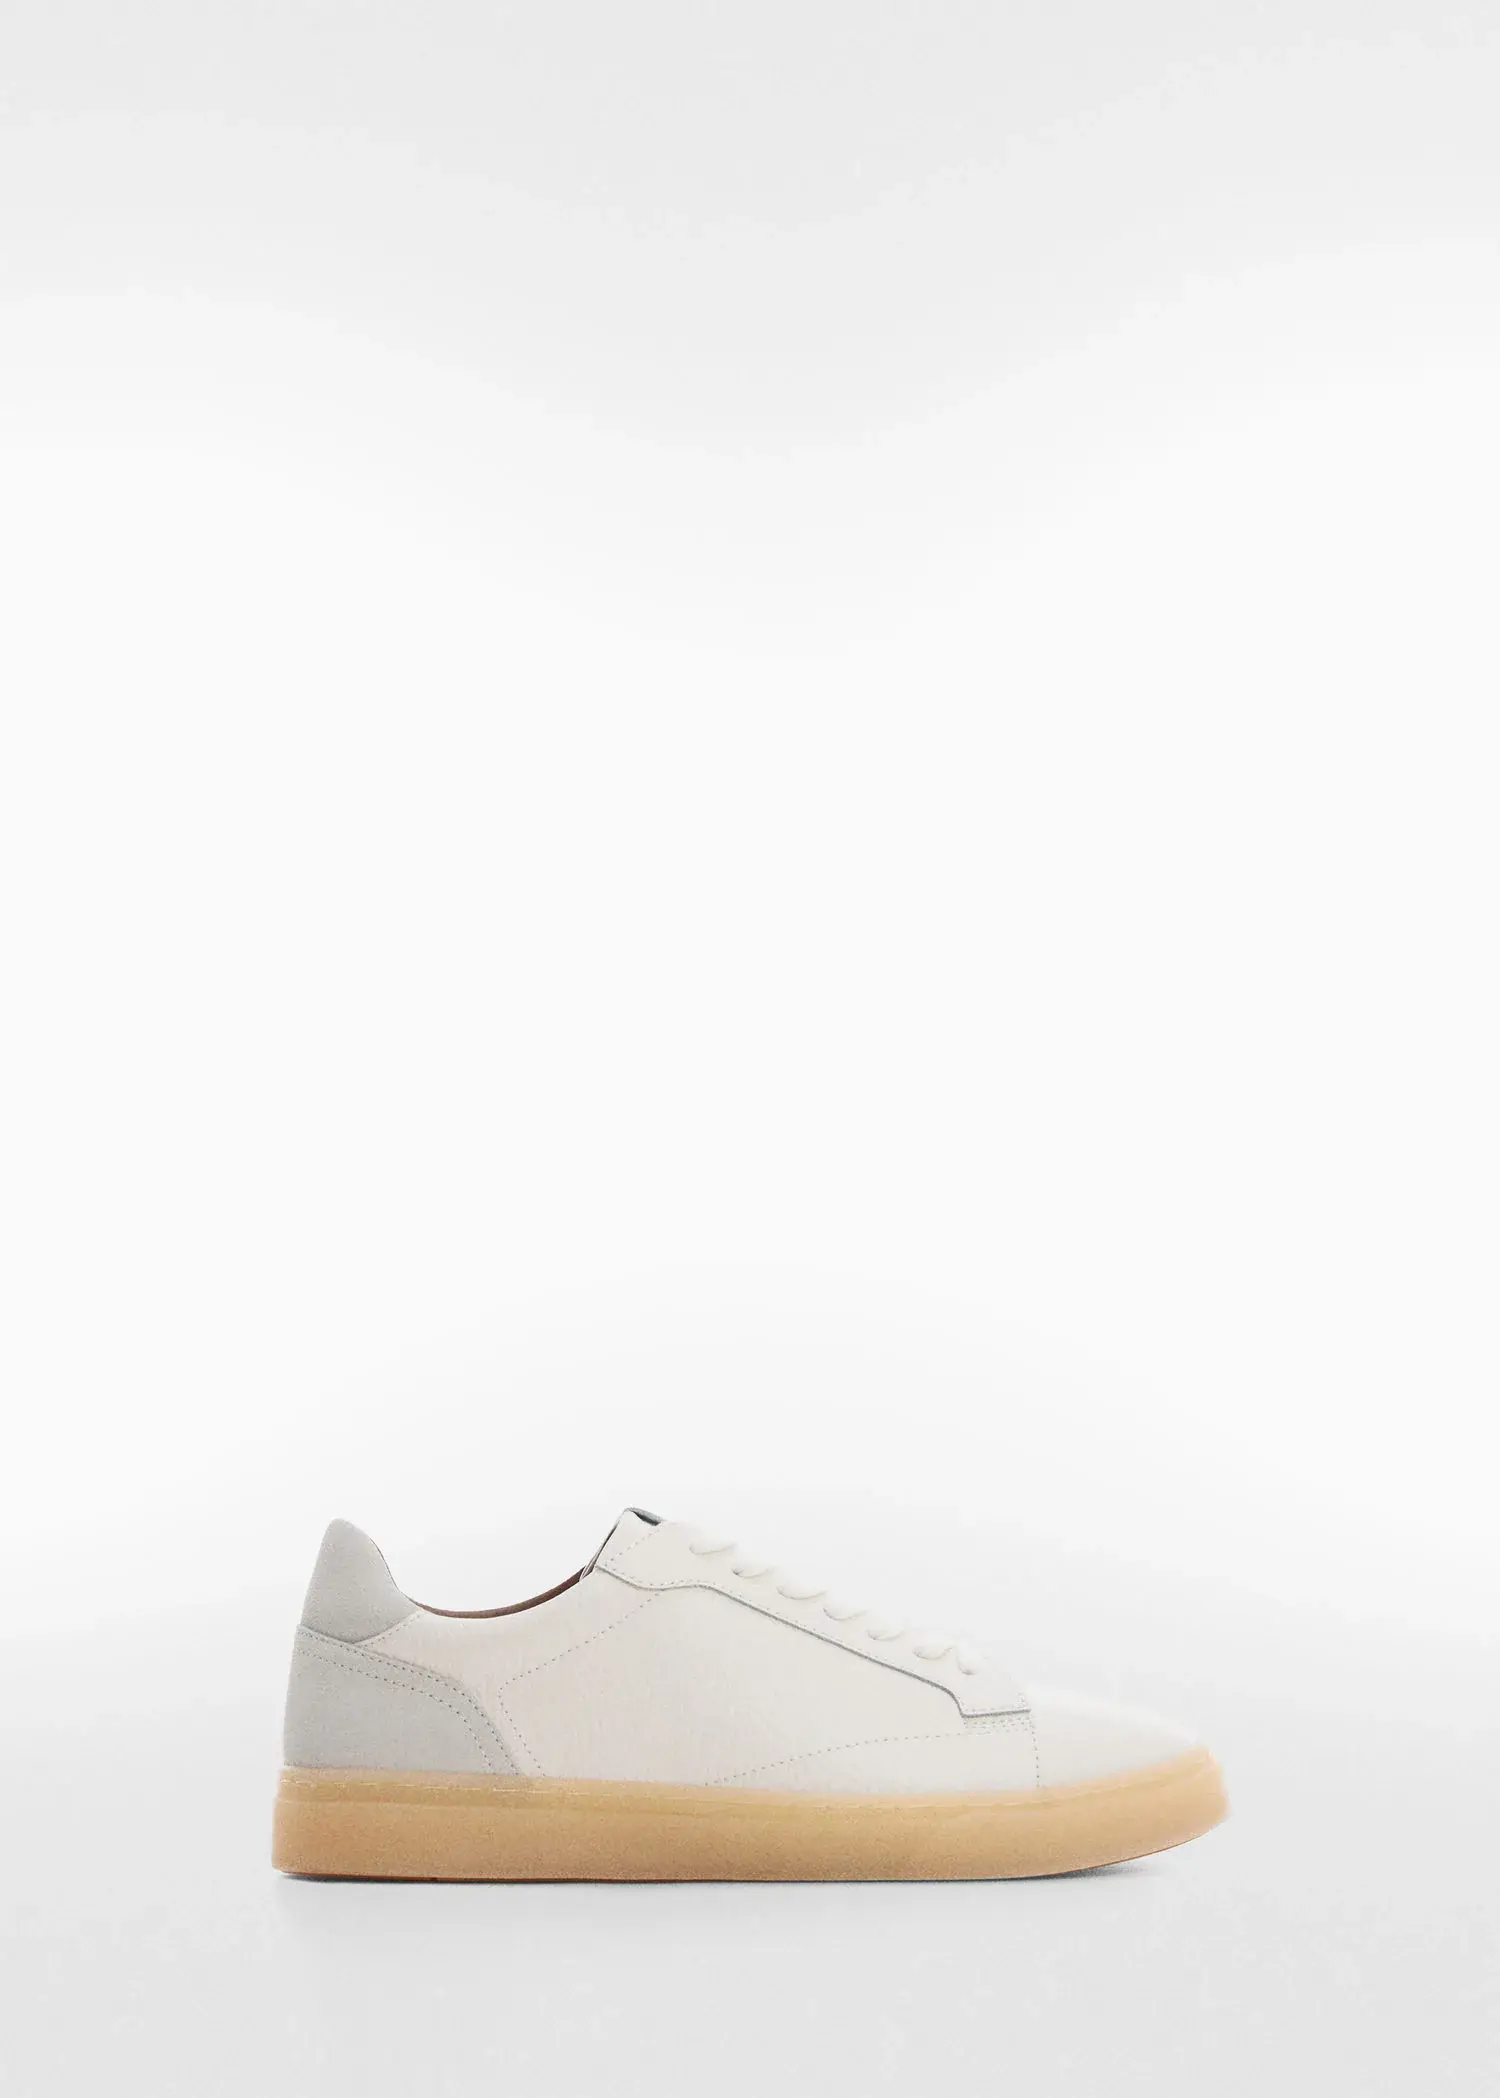 Mango Nappa leather trainers. a pair of white sneakers with a wooden bottom. 